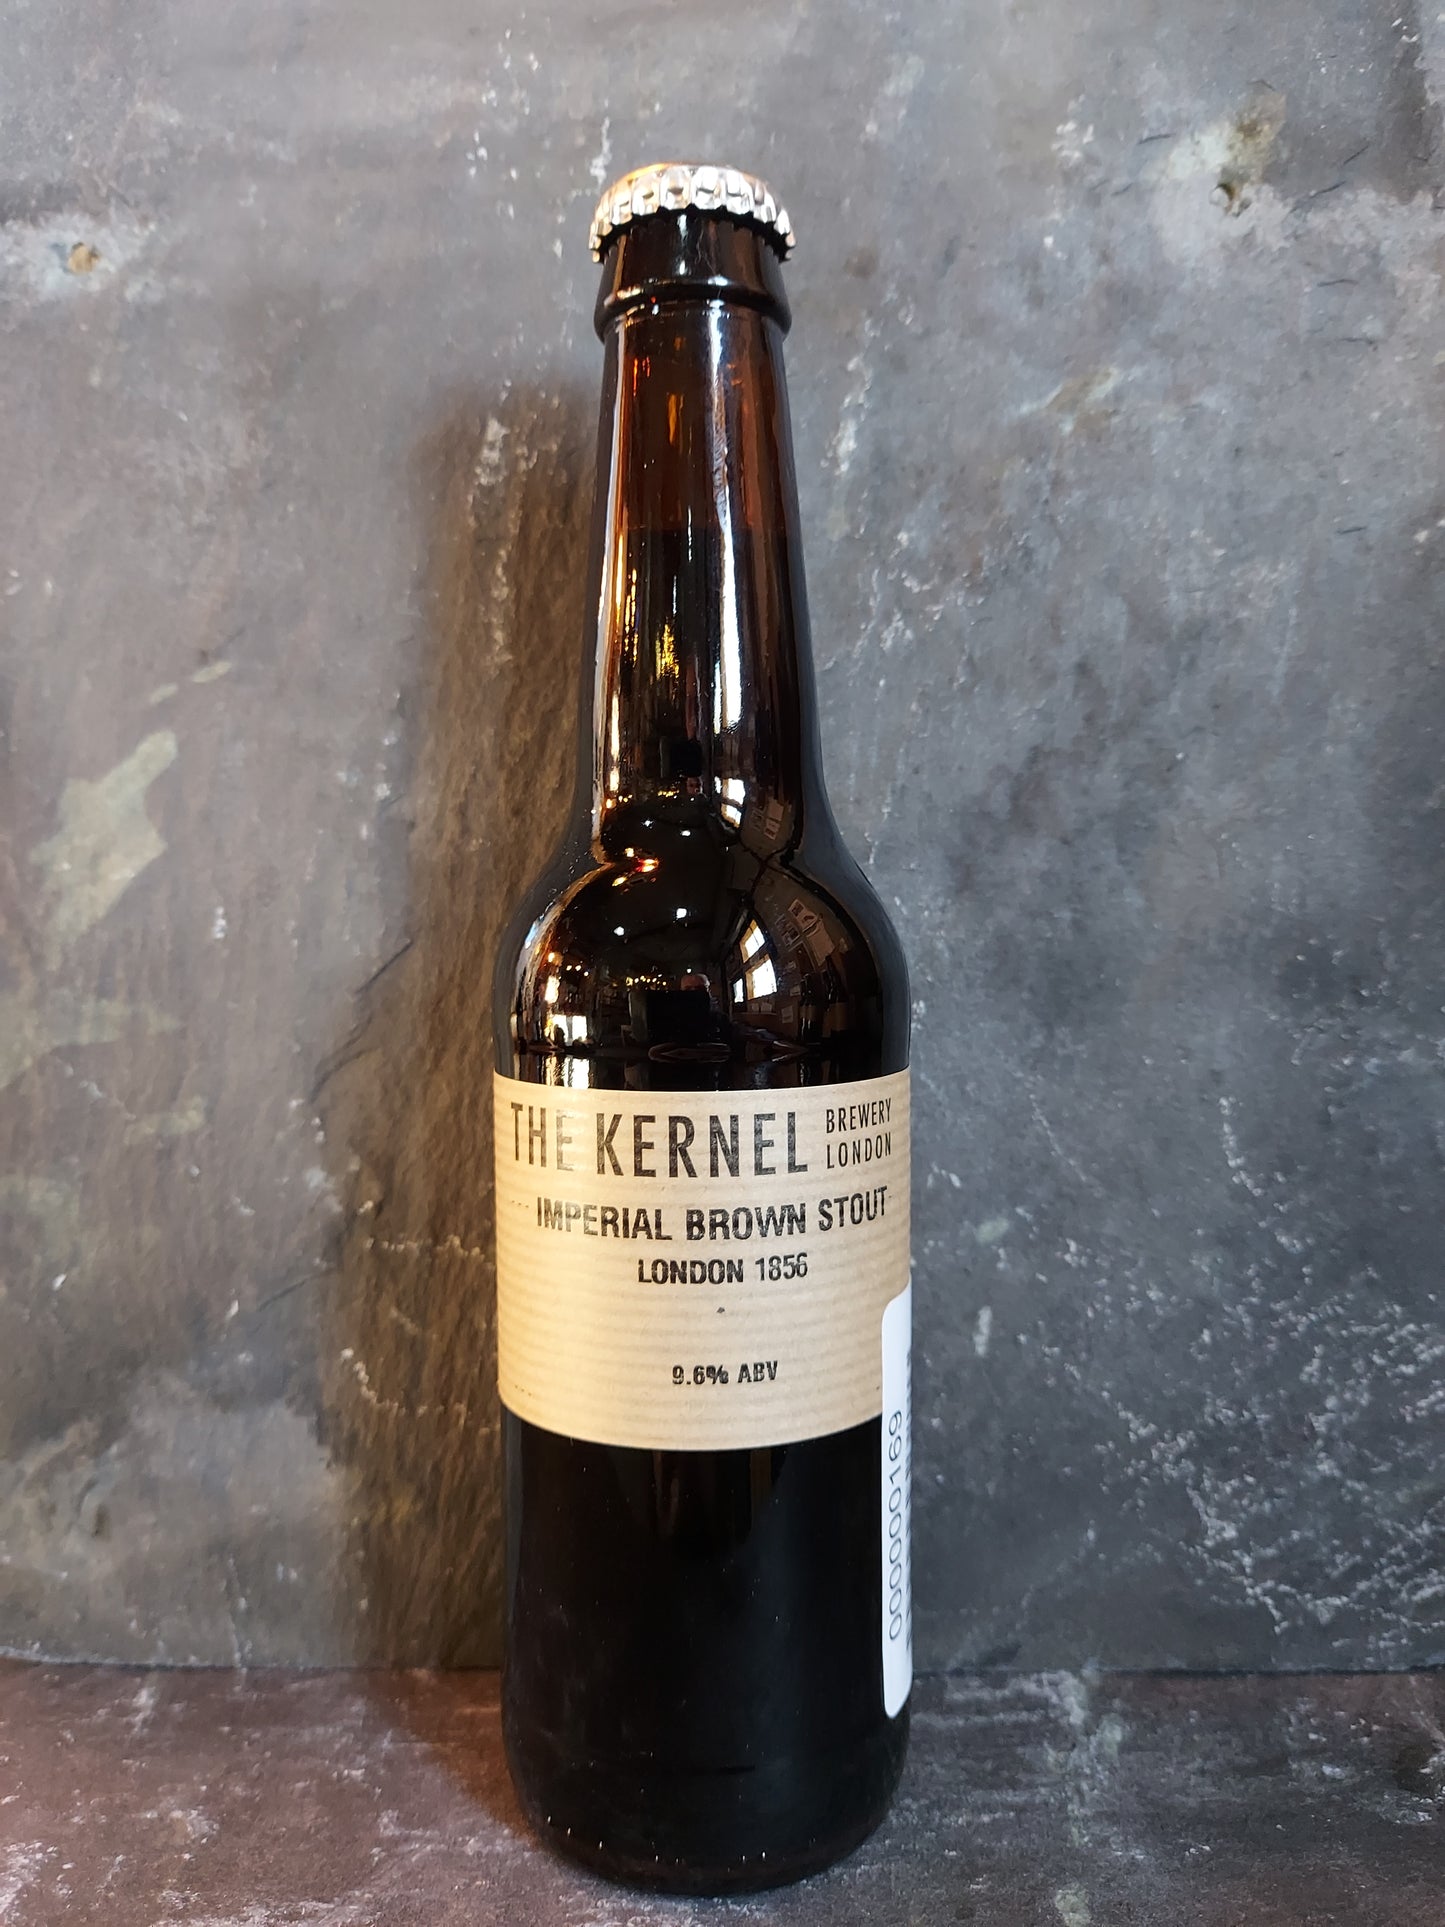 Imperial Brown Stout - Kernel